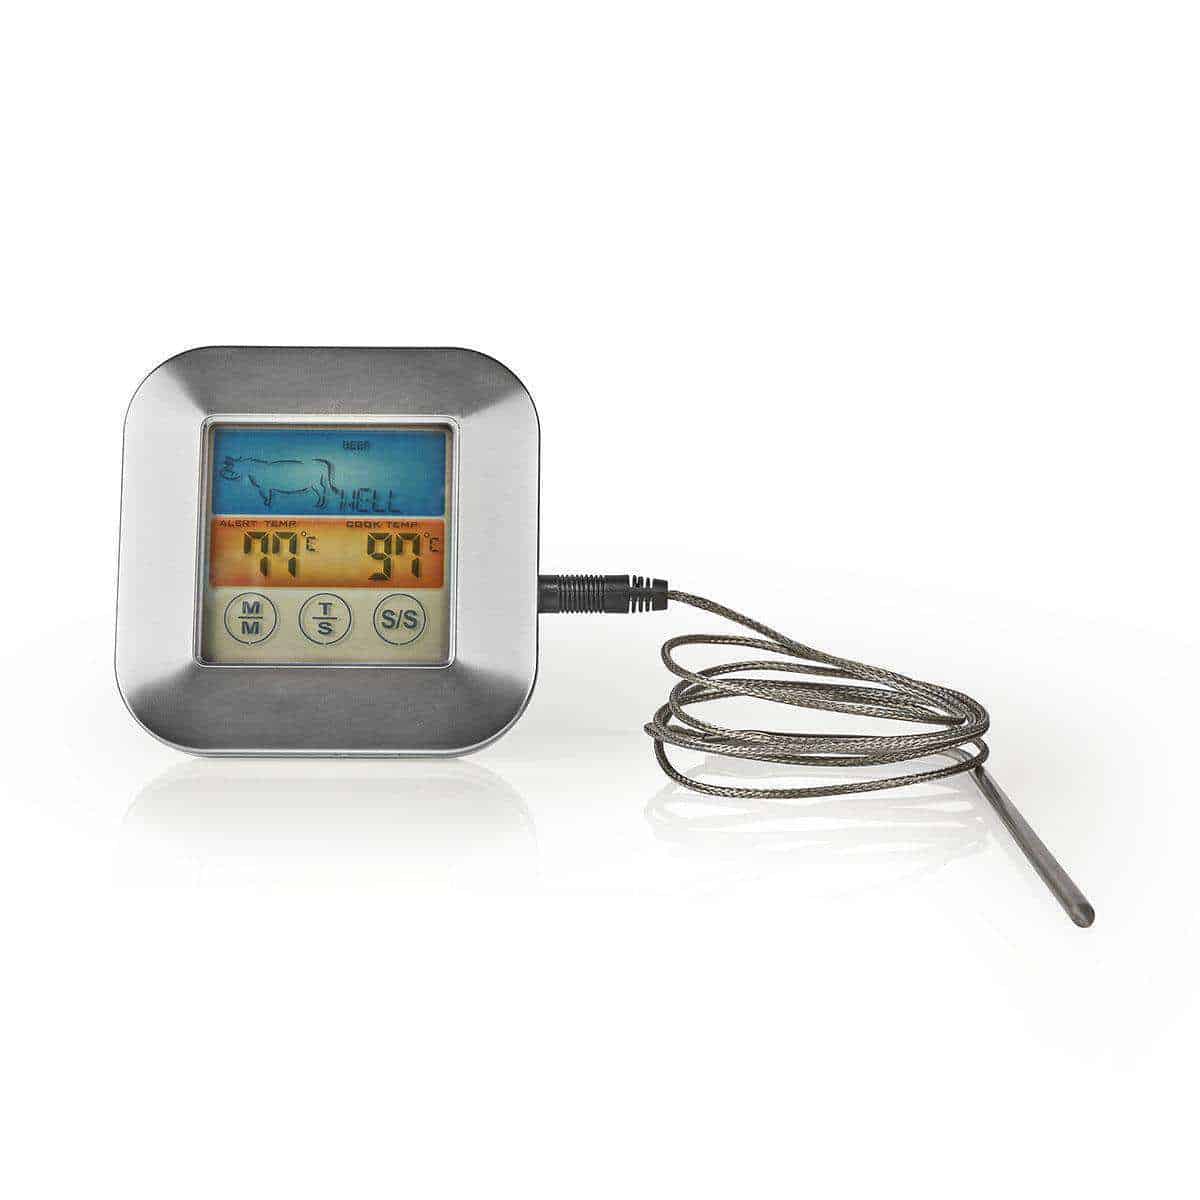 Meat Thermometer Nedis Digital Colour Display